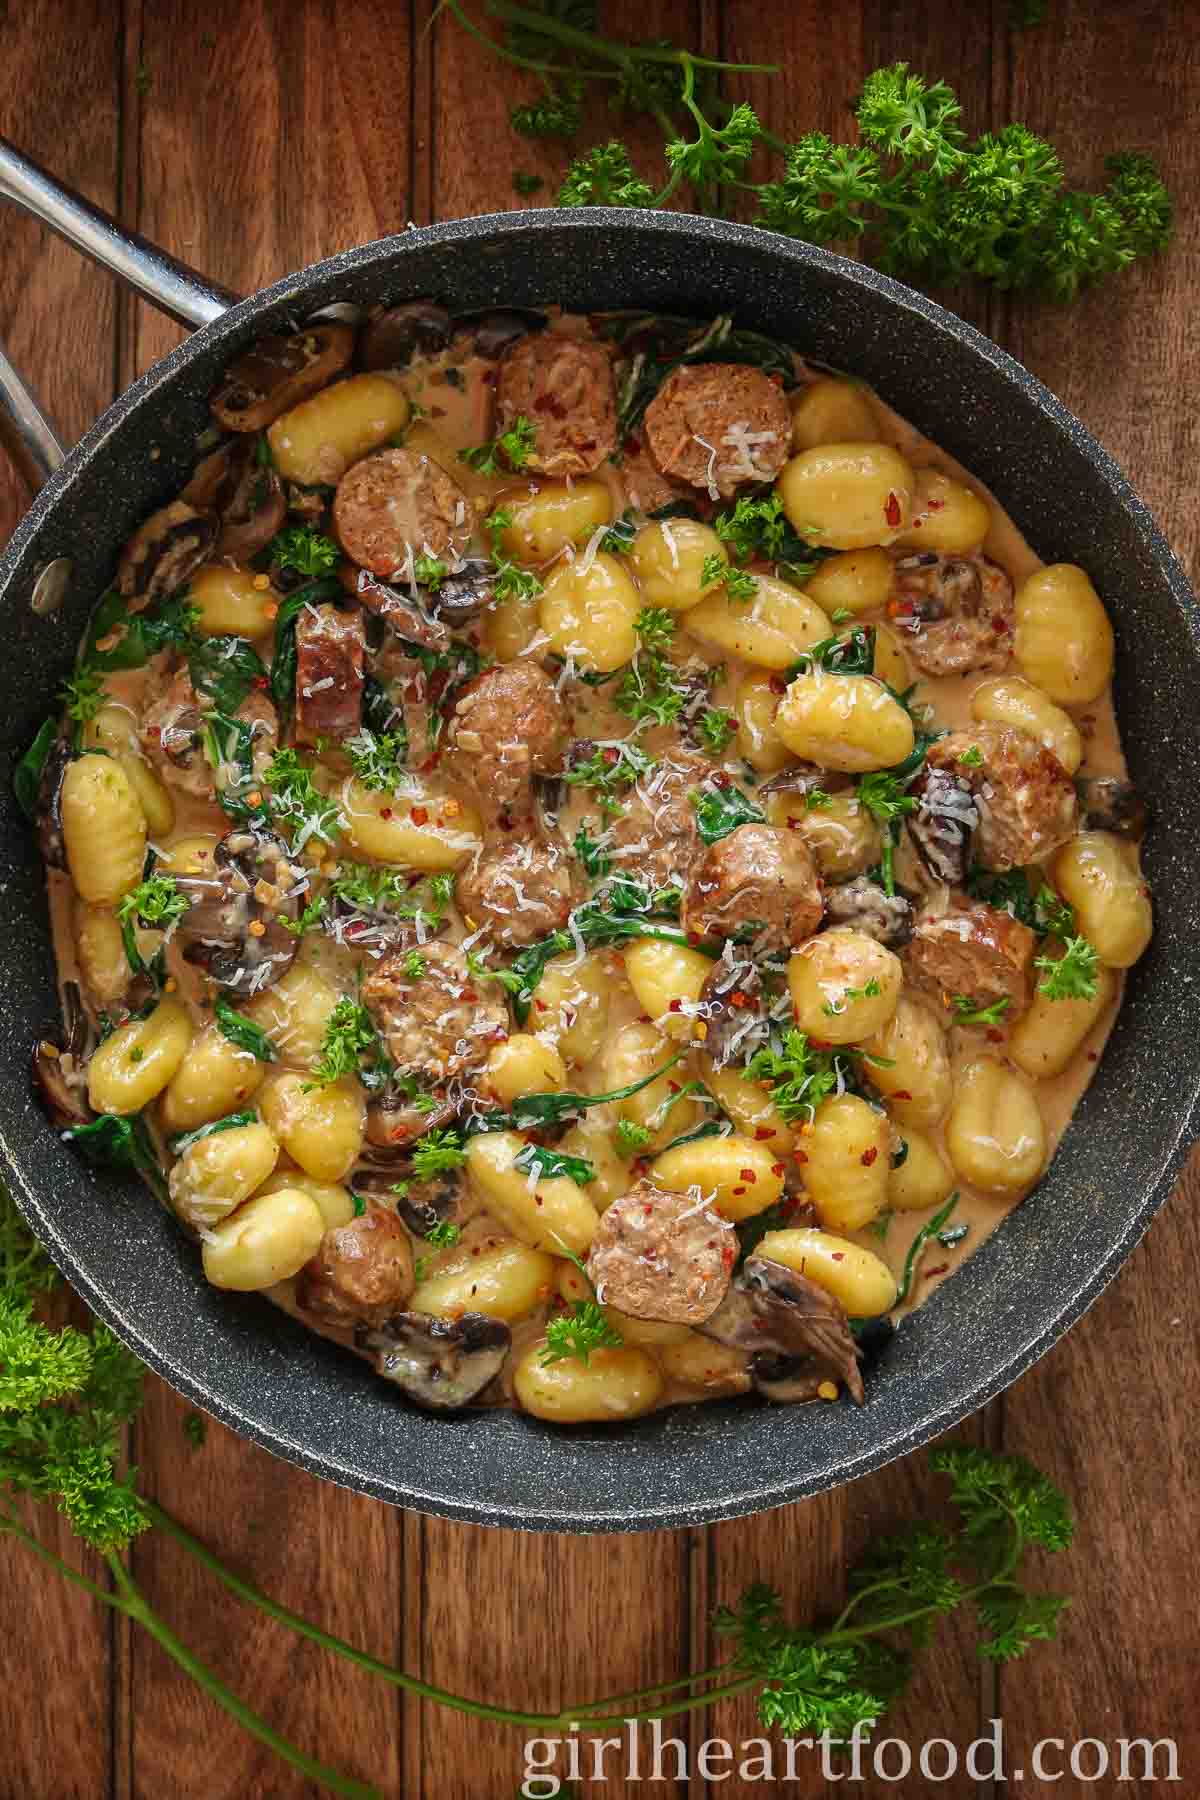 Pan of sausage, gnocchi, mushrooms and spinach in cream sauce next to fresh parsley.